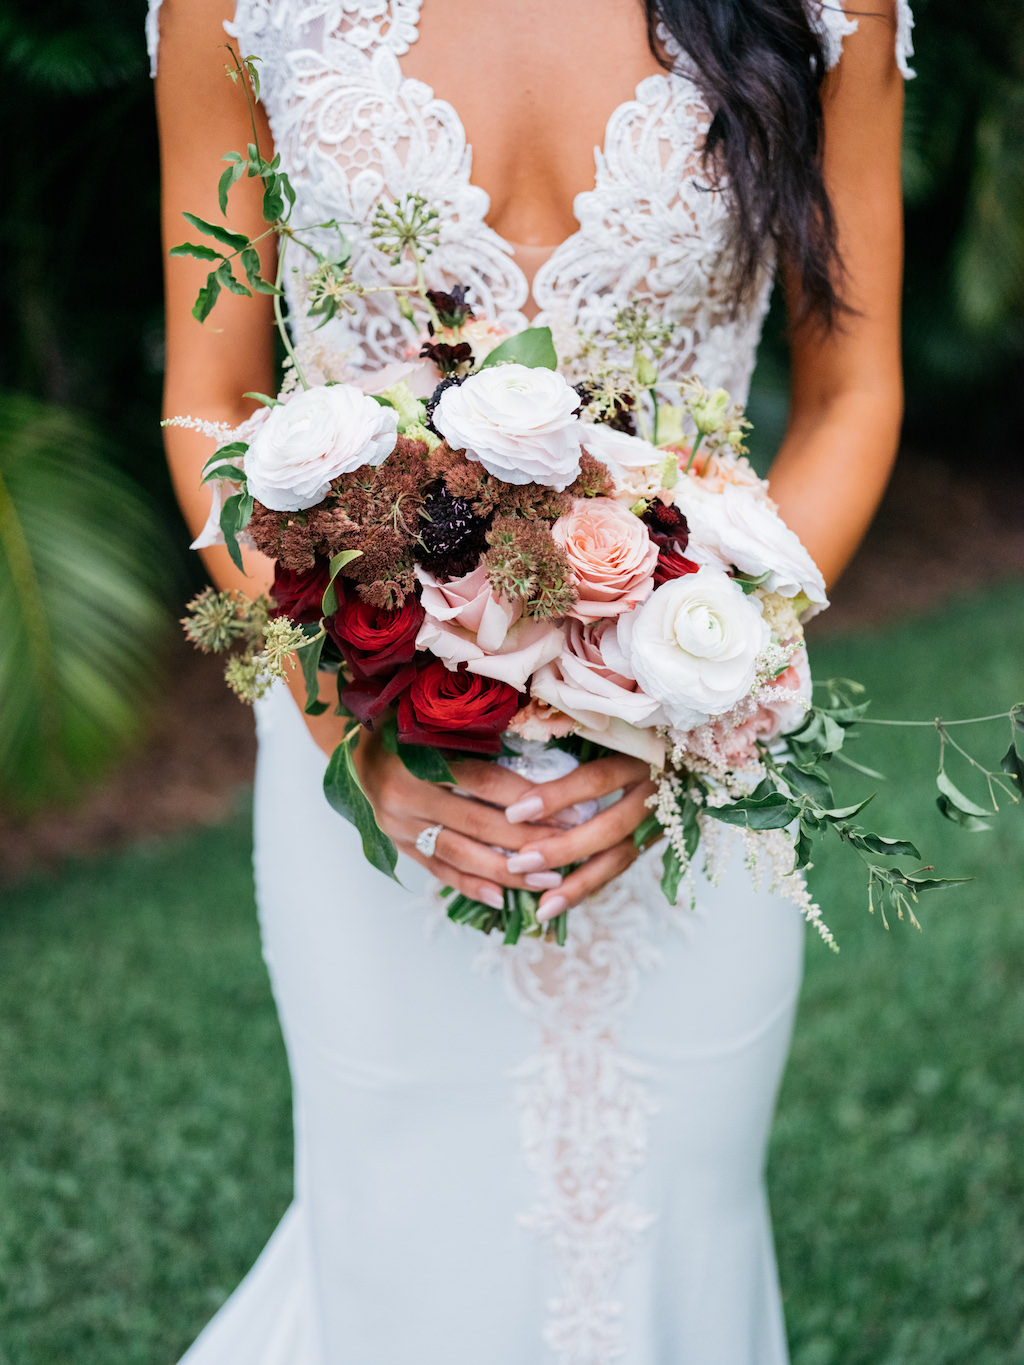 Bride Wedding Portrait in Romantic Fitted Lace and Illusion Deep V Neck Pnina Tornai Wedding Dress with Garden Inspired Wedding Bouquet with Ivory, Blush Pink, Red and Greenery Florals | Tampa Bay Wedding Planner Parties A'la Carte